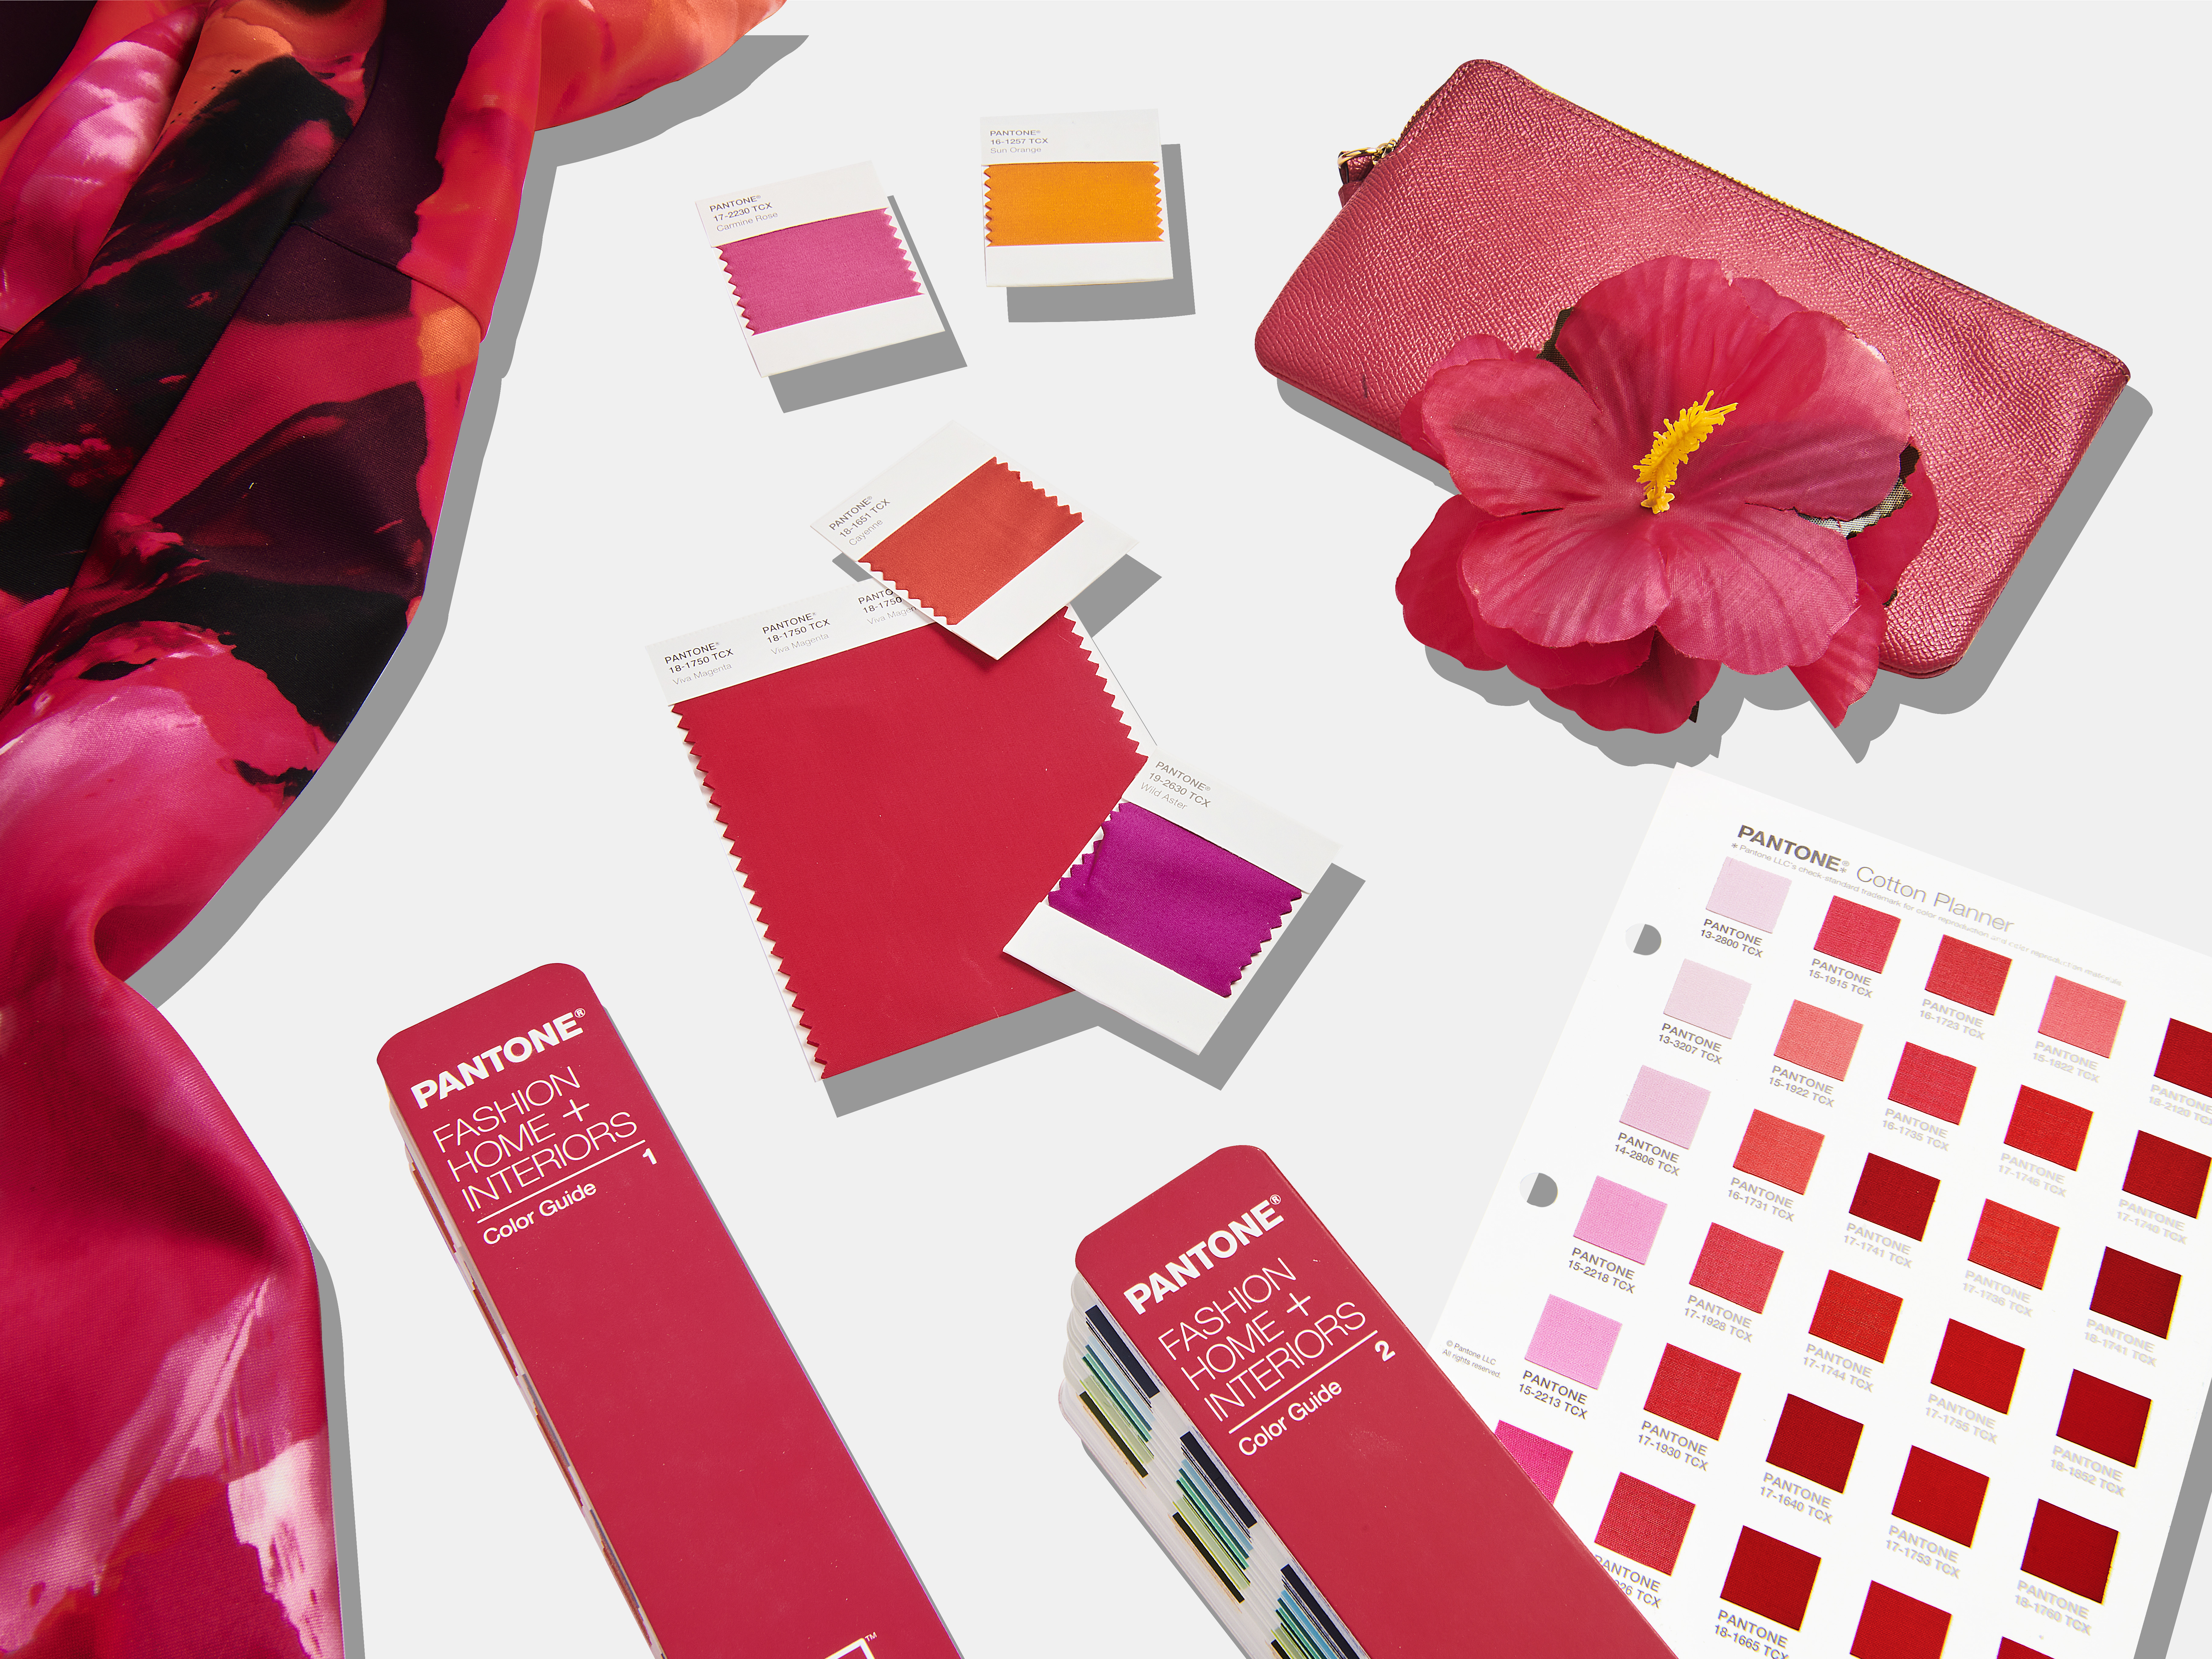 Pantone's 2023 color of the year is 'Viva Magenta'